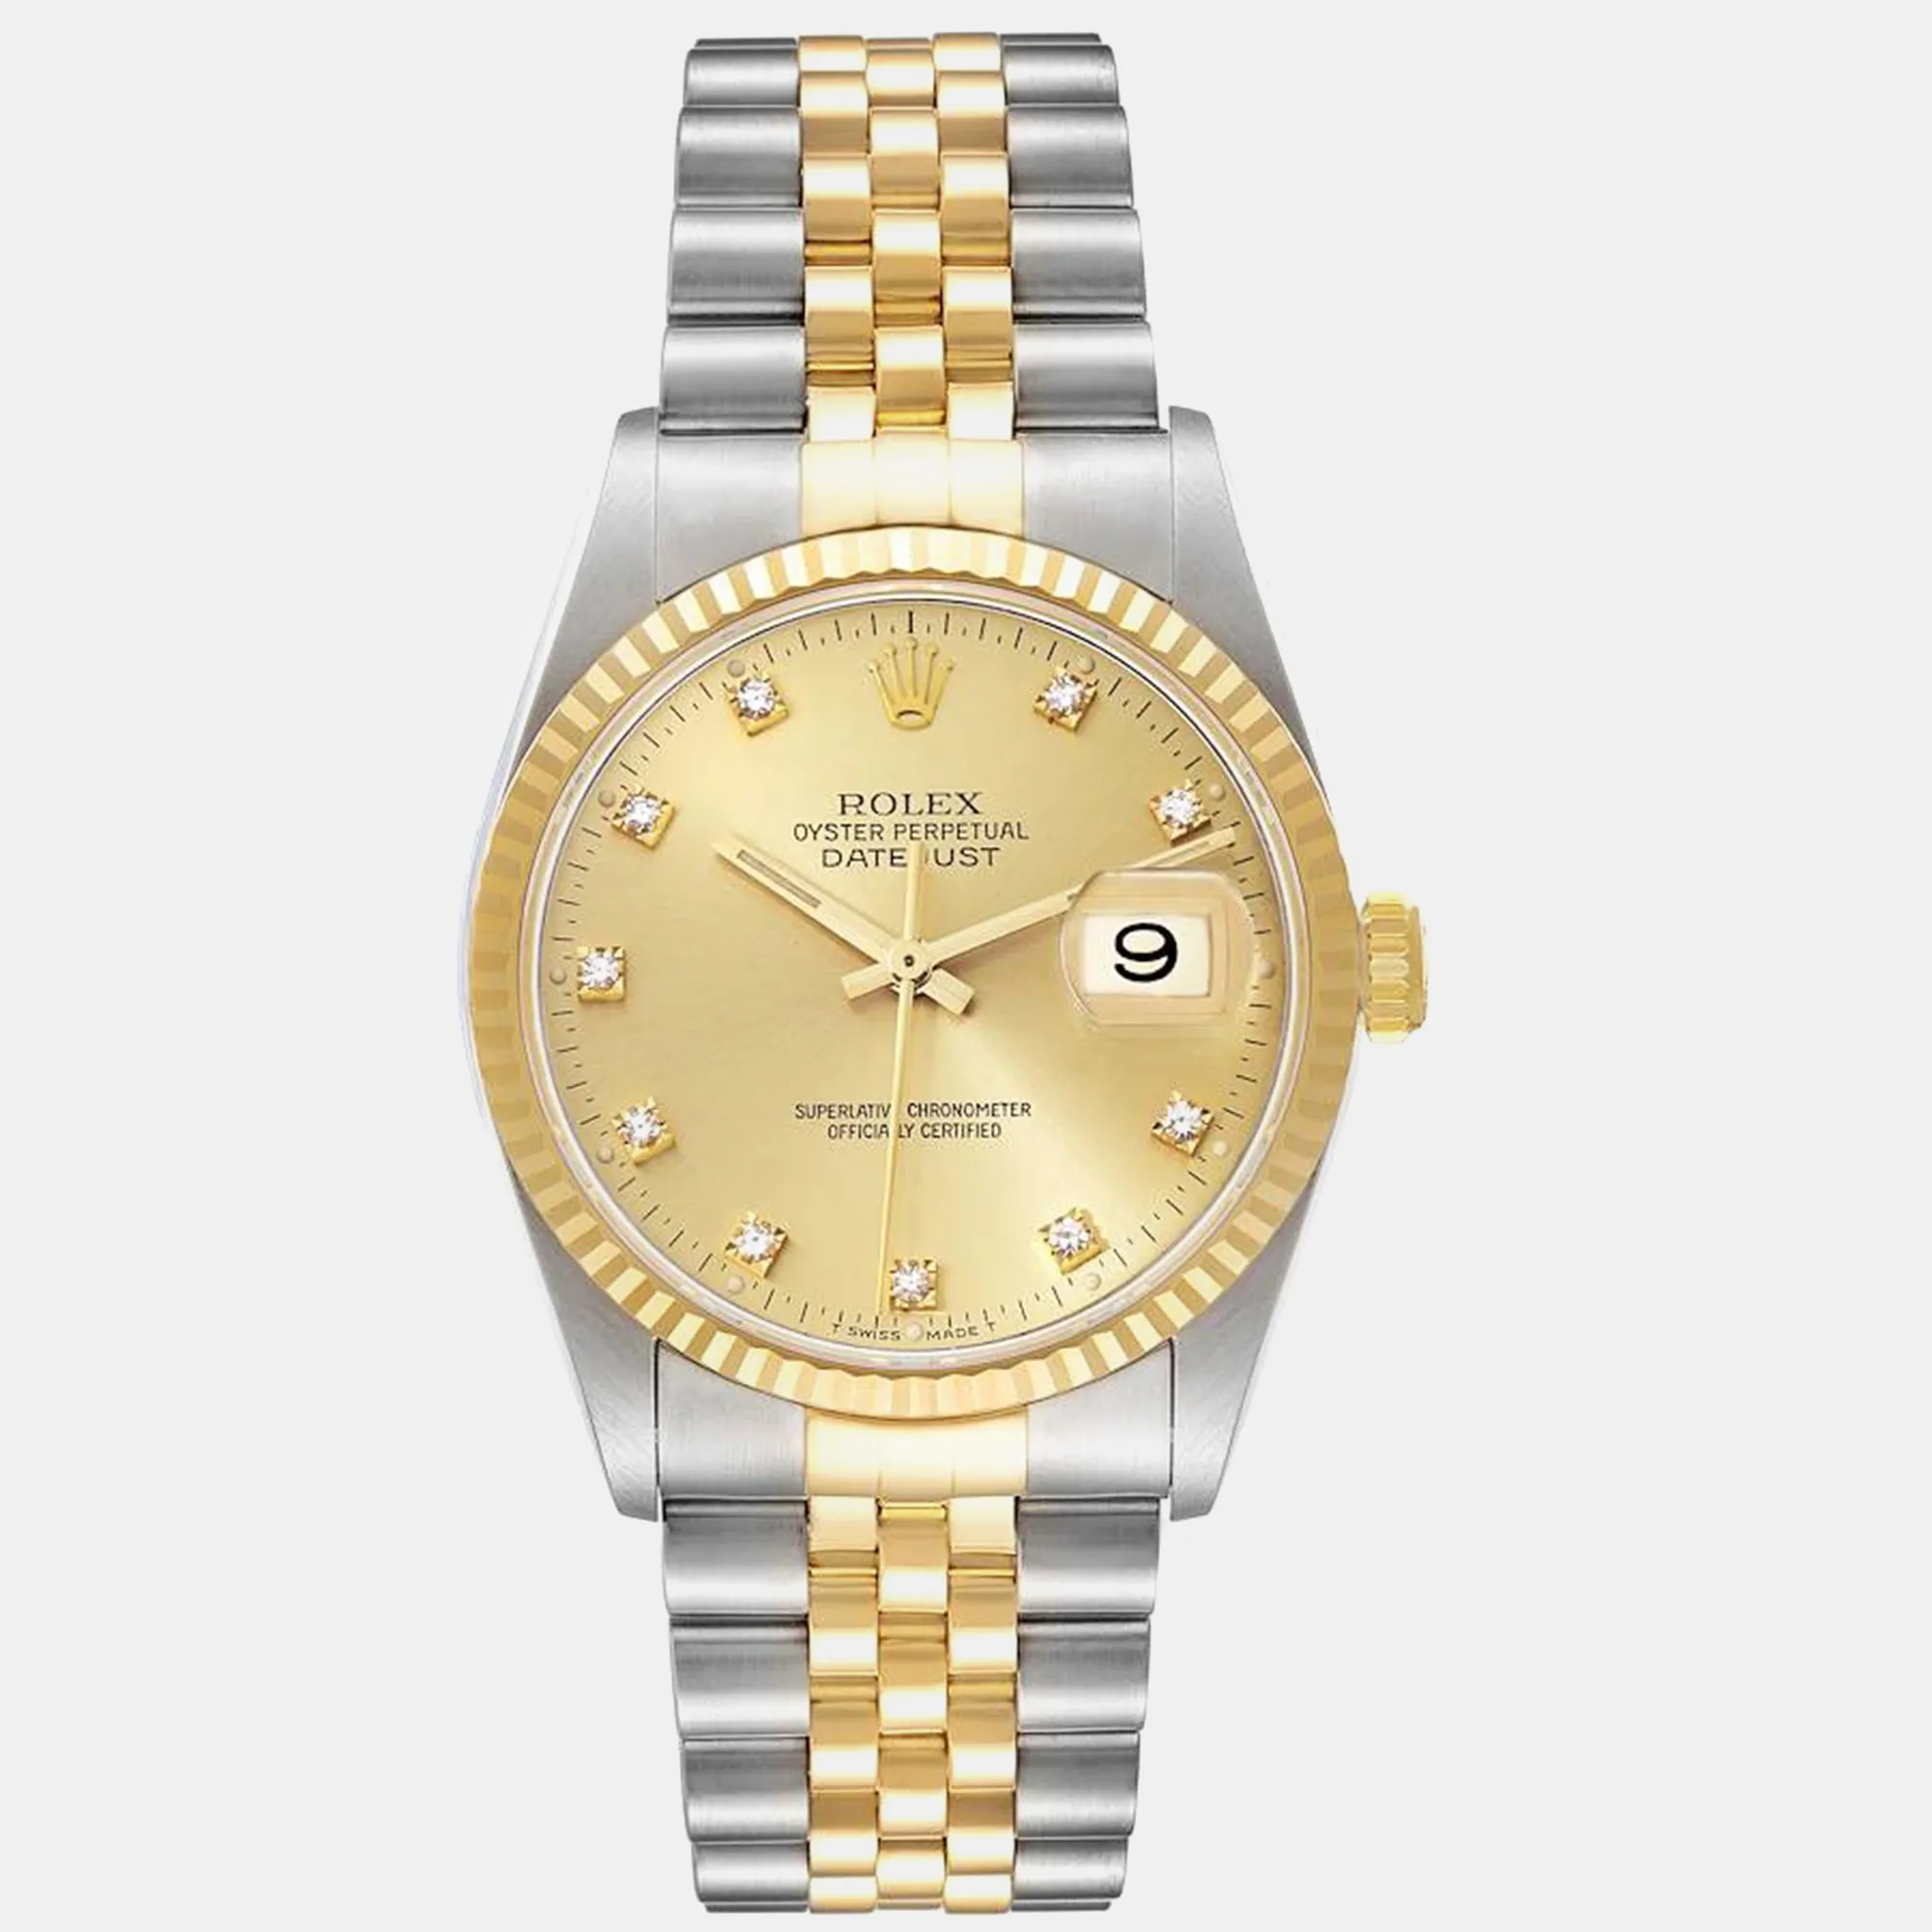 Rolex Datejust 36mm Yellow gold and stainless steel Champagne